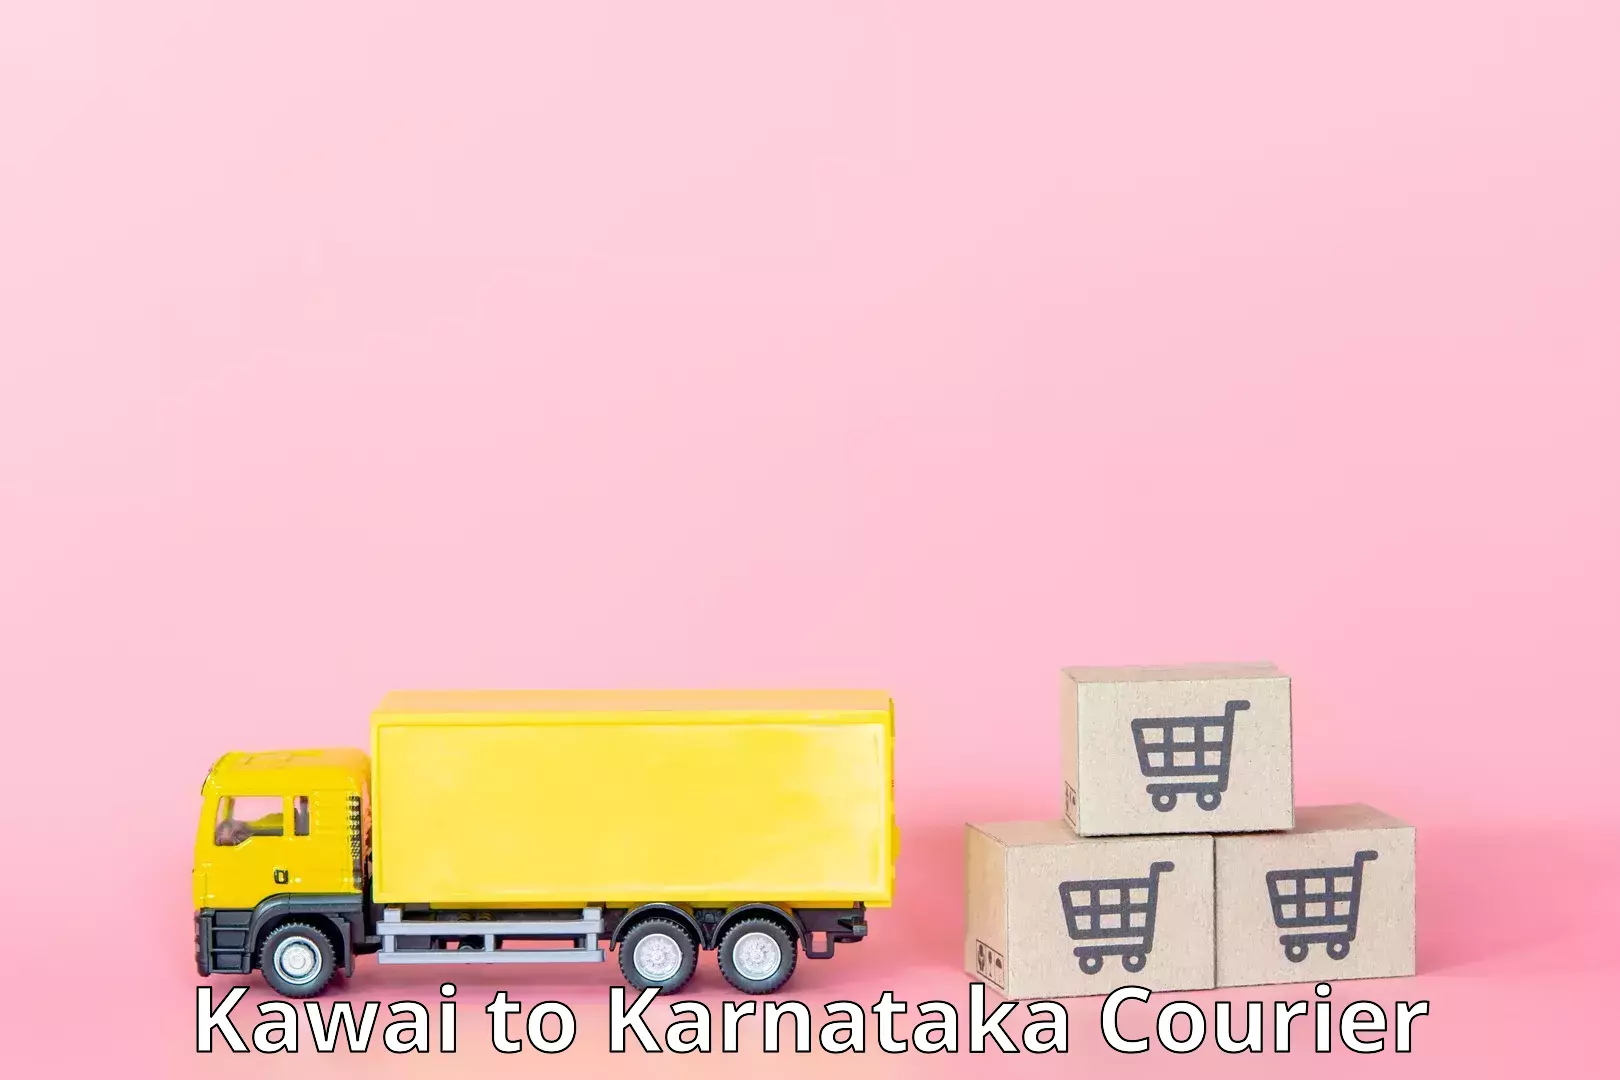 Round-the-clock parcel delivery Kawai to yedrami